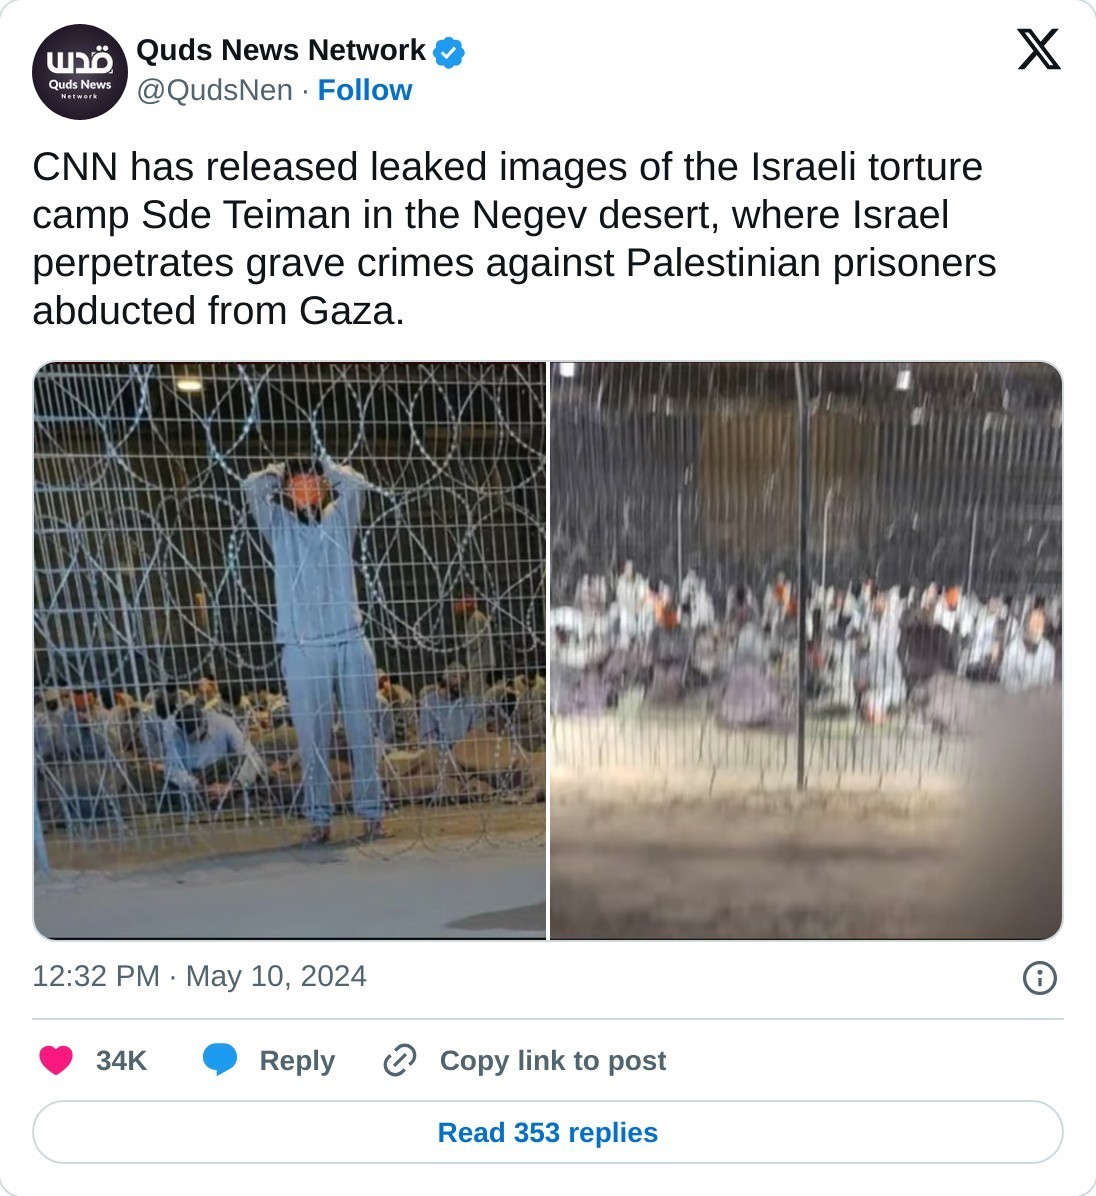 CNN has released leaked images of the Israeli torture camp Sde Teiman in the Negev desert, where Israel perpetrates grave crimes against Palestinian prisoners abducted from Gaza. pic.twitter.com/nMyB9X9FGo  — Quds News Network (@QudsNen) May 10, 2024